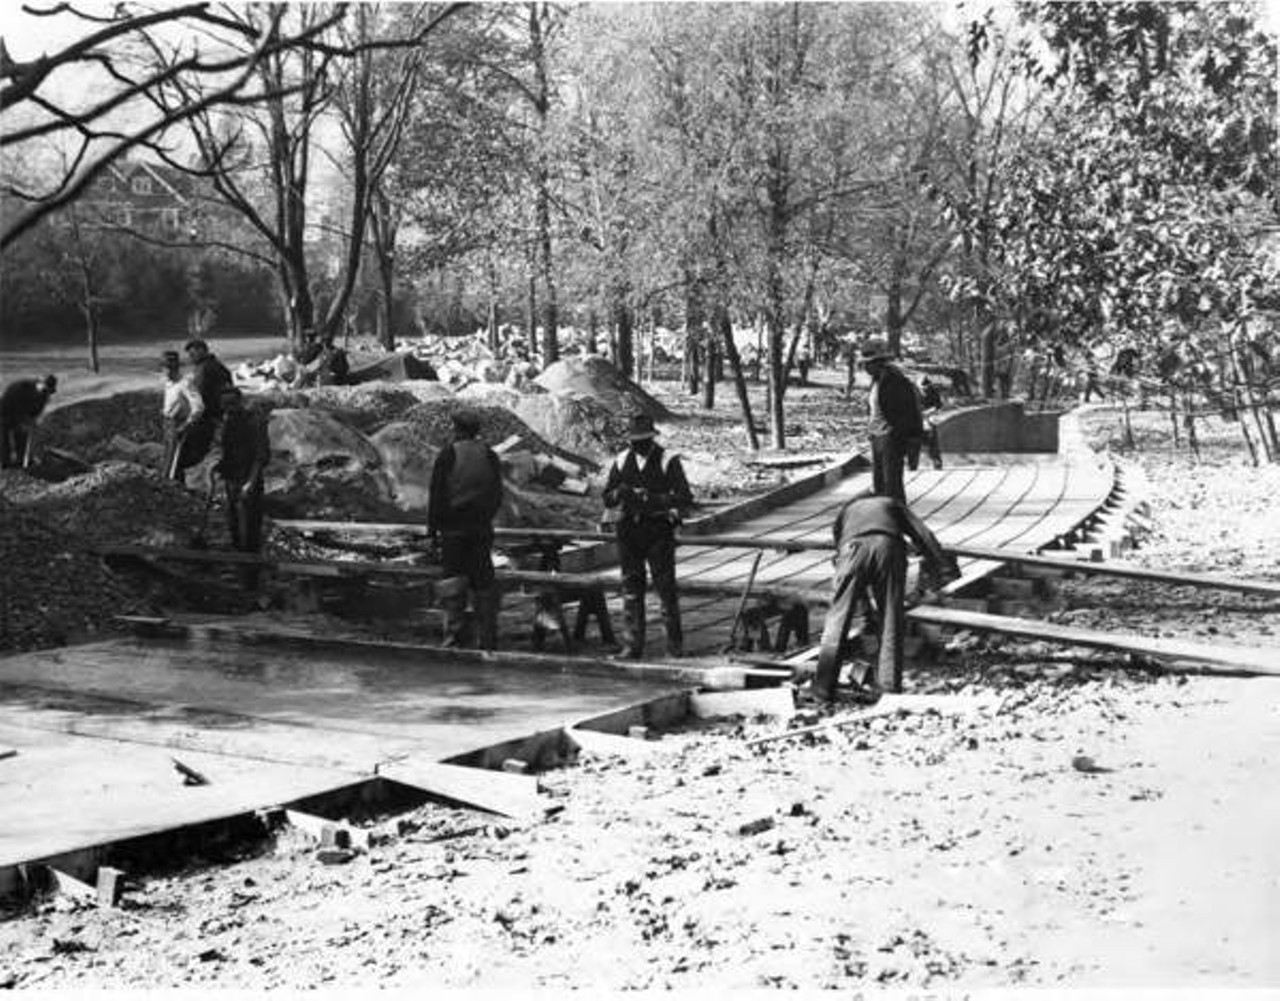 Covering the creek during the construction of Cain Park, 1935.